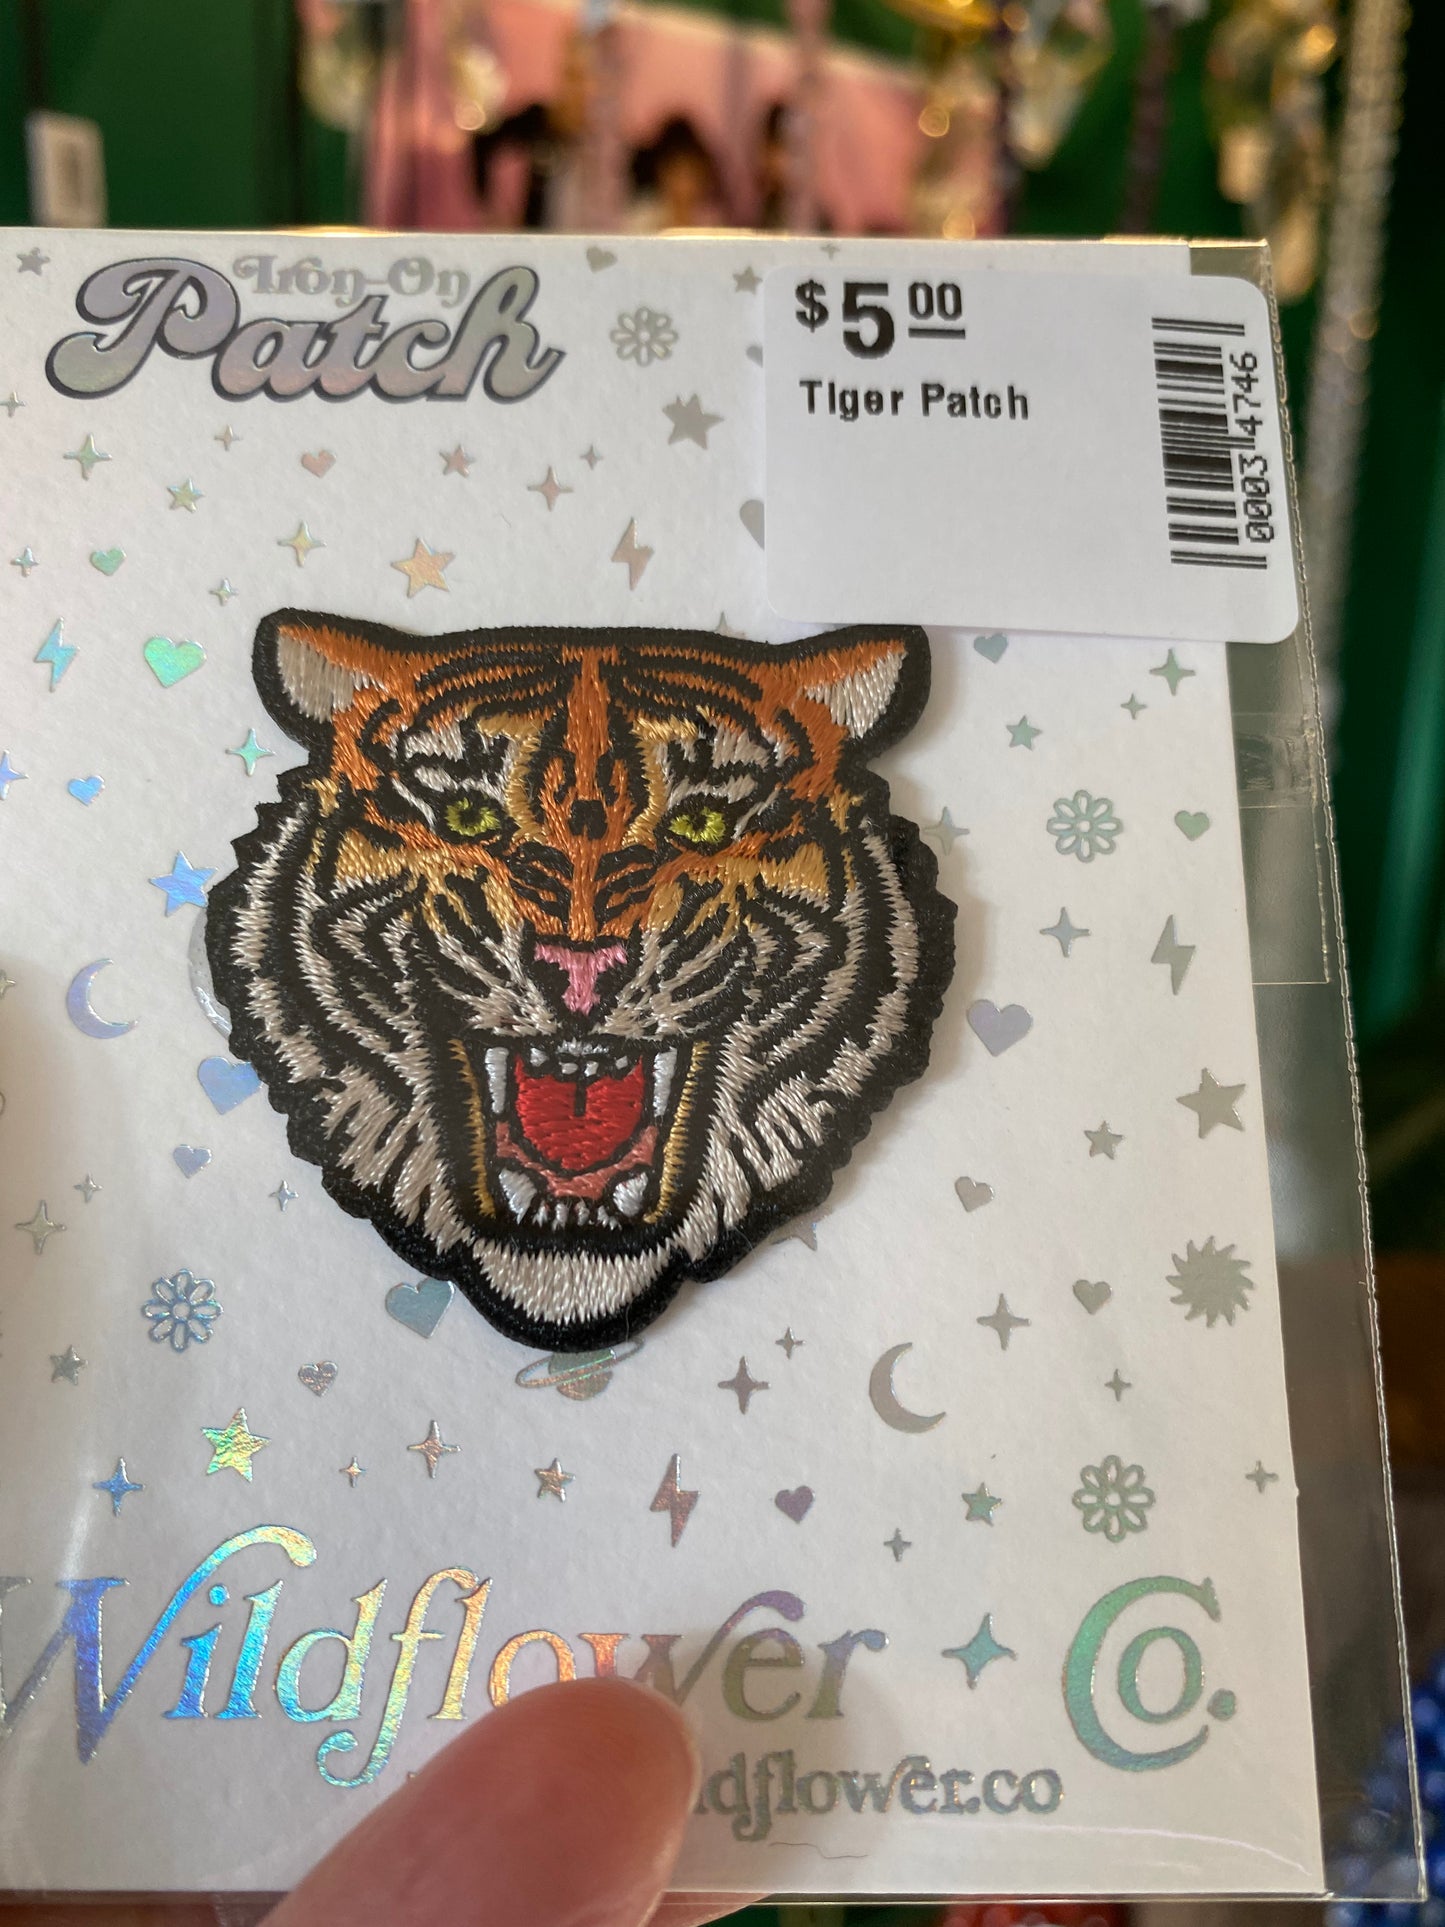 Tiger Patch - Moon Room Shop and Wellness